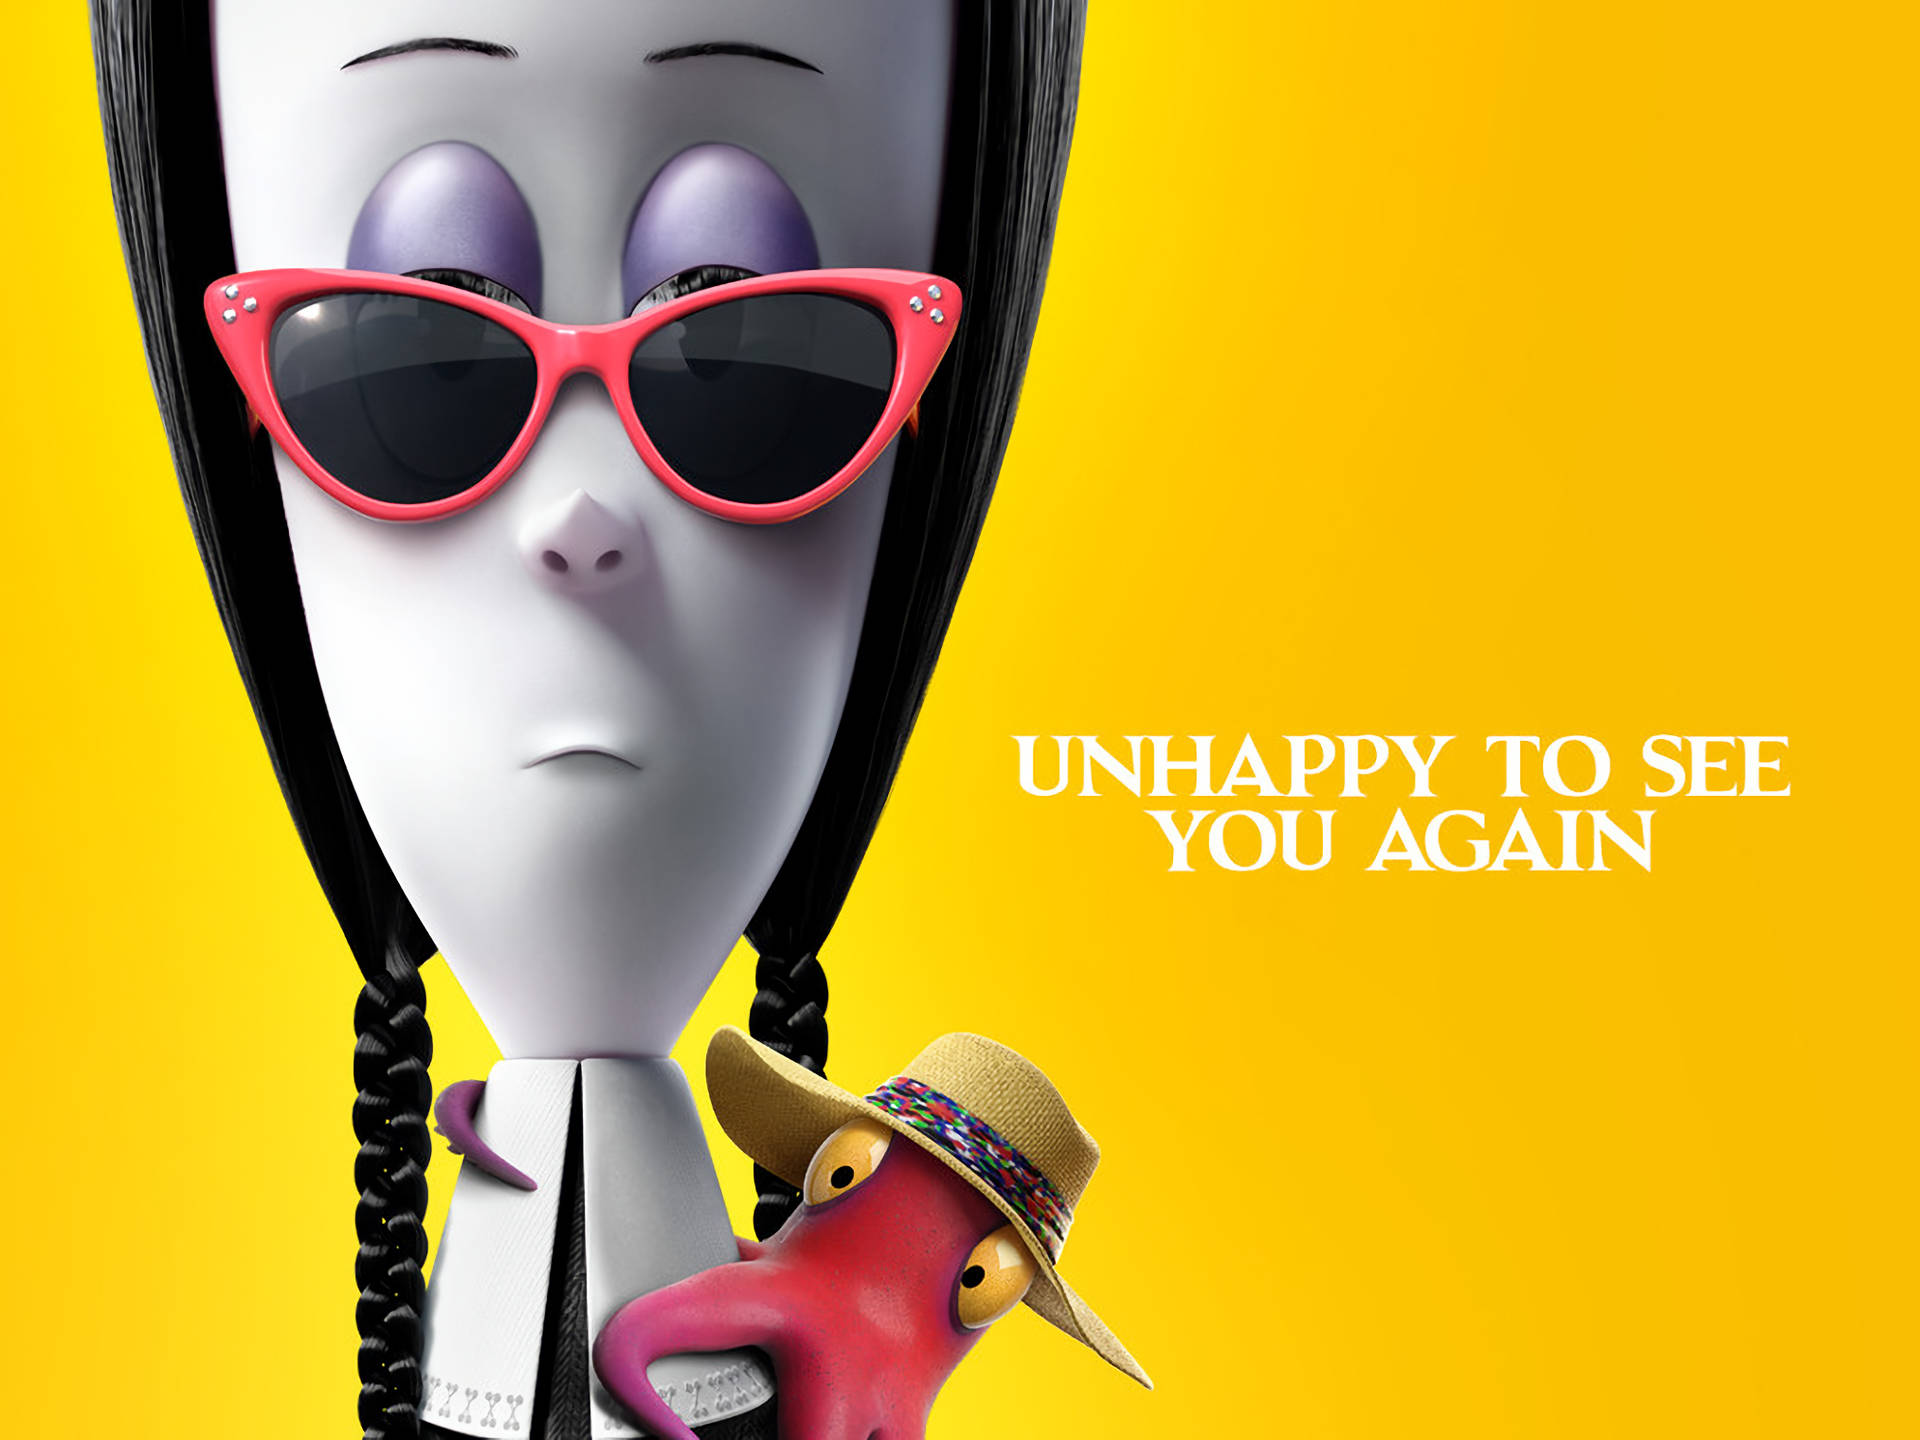 Wednesday Unhappy The Addams Family 2 Wallpaper